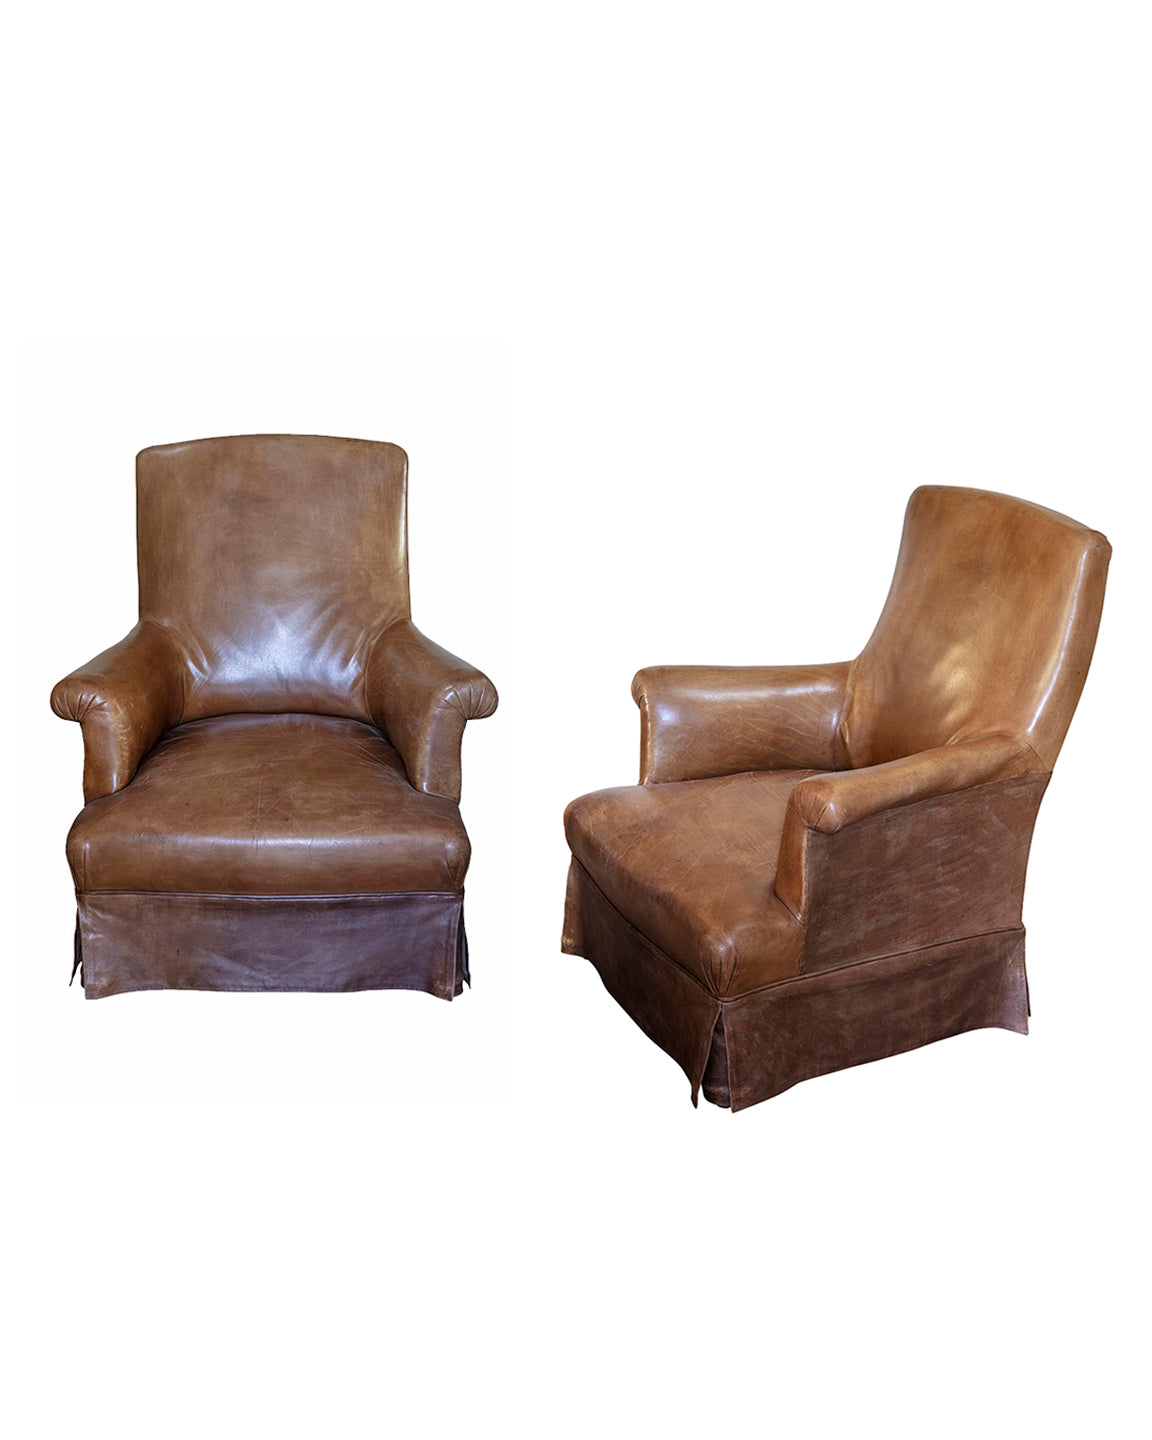 Pair of brandy leather armchairs